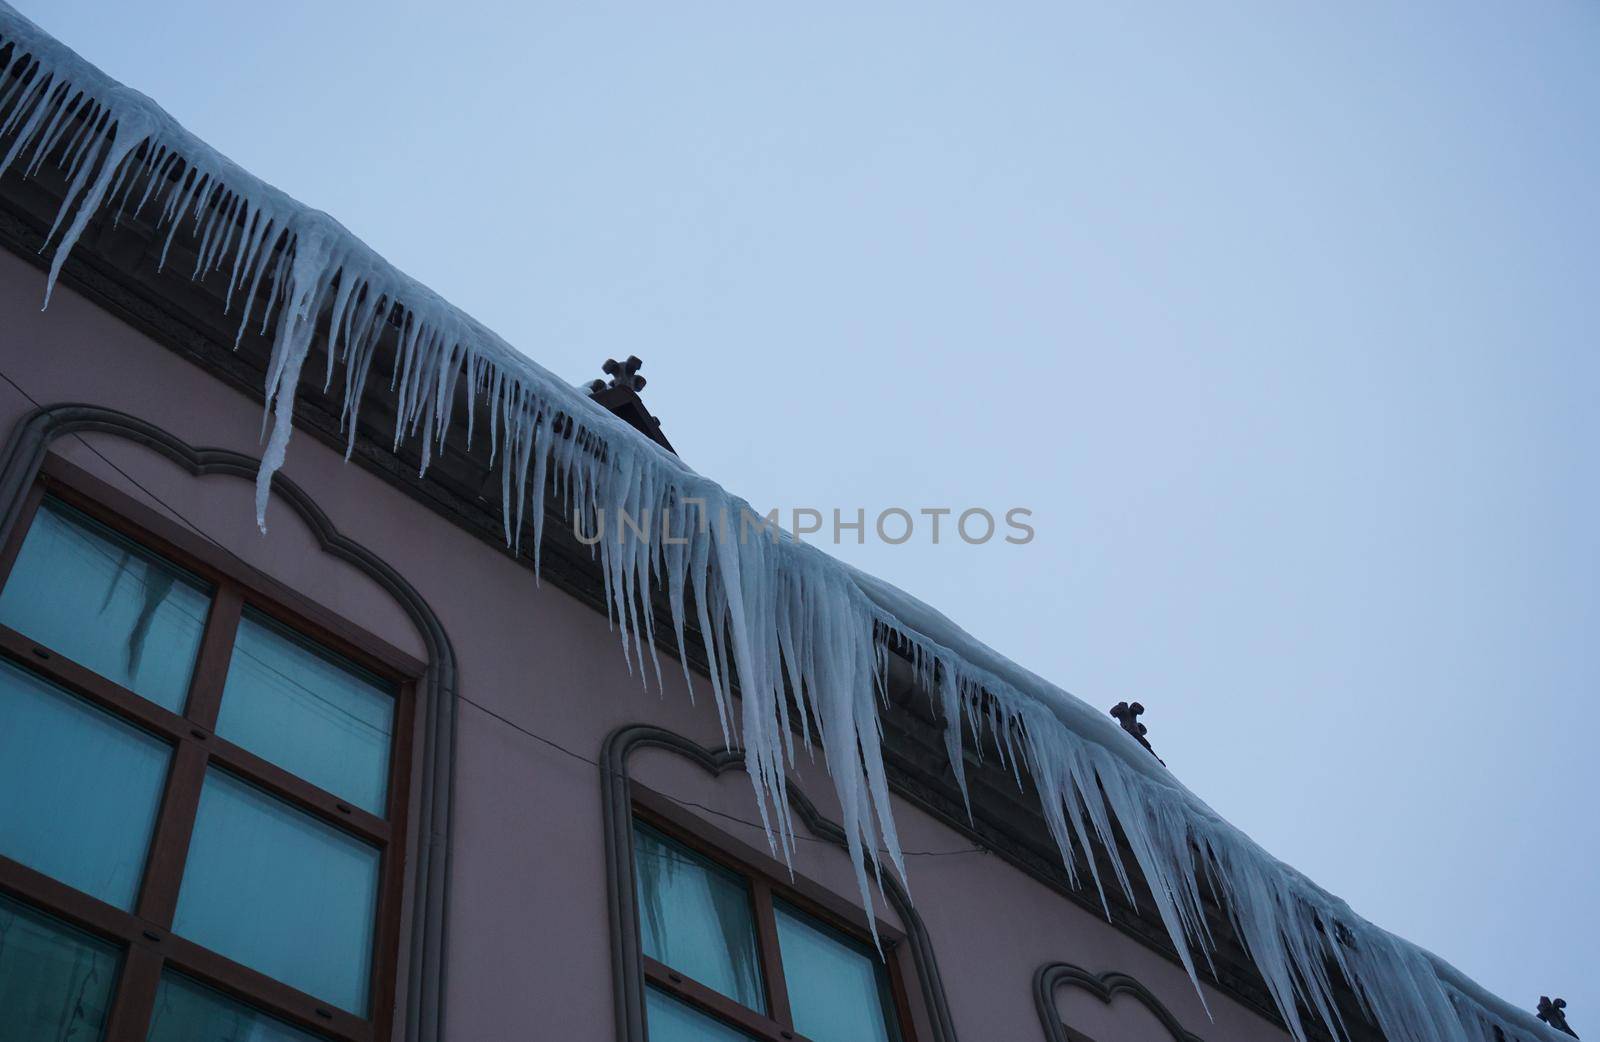 Large icicles of ice hang on the roof of the house. High quality photo